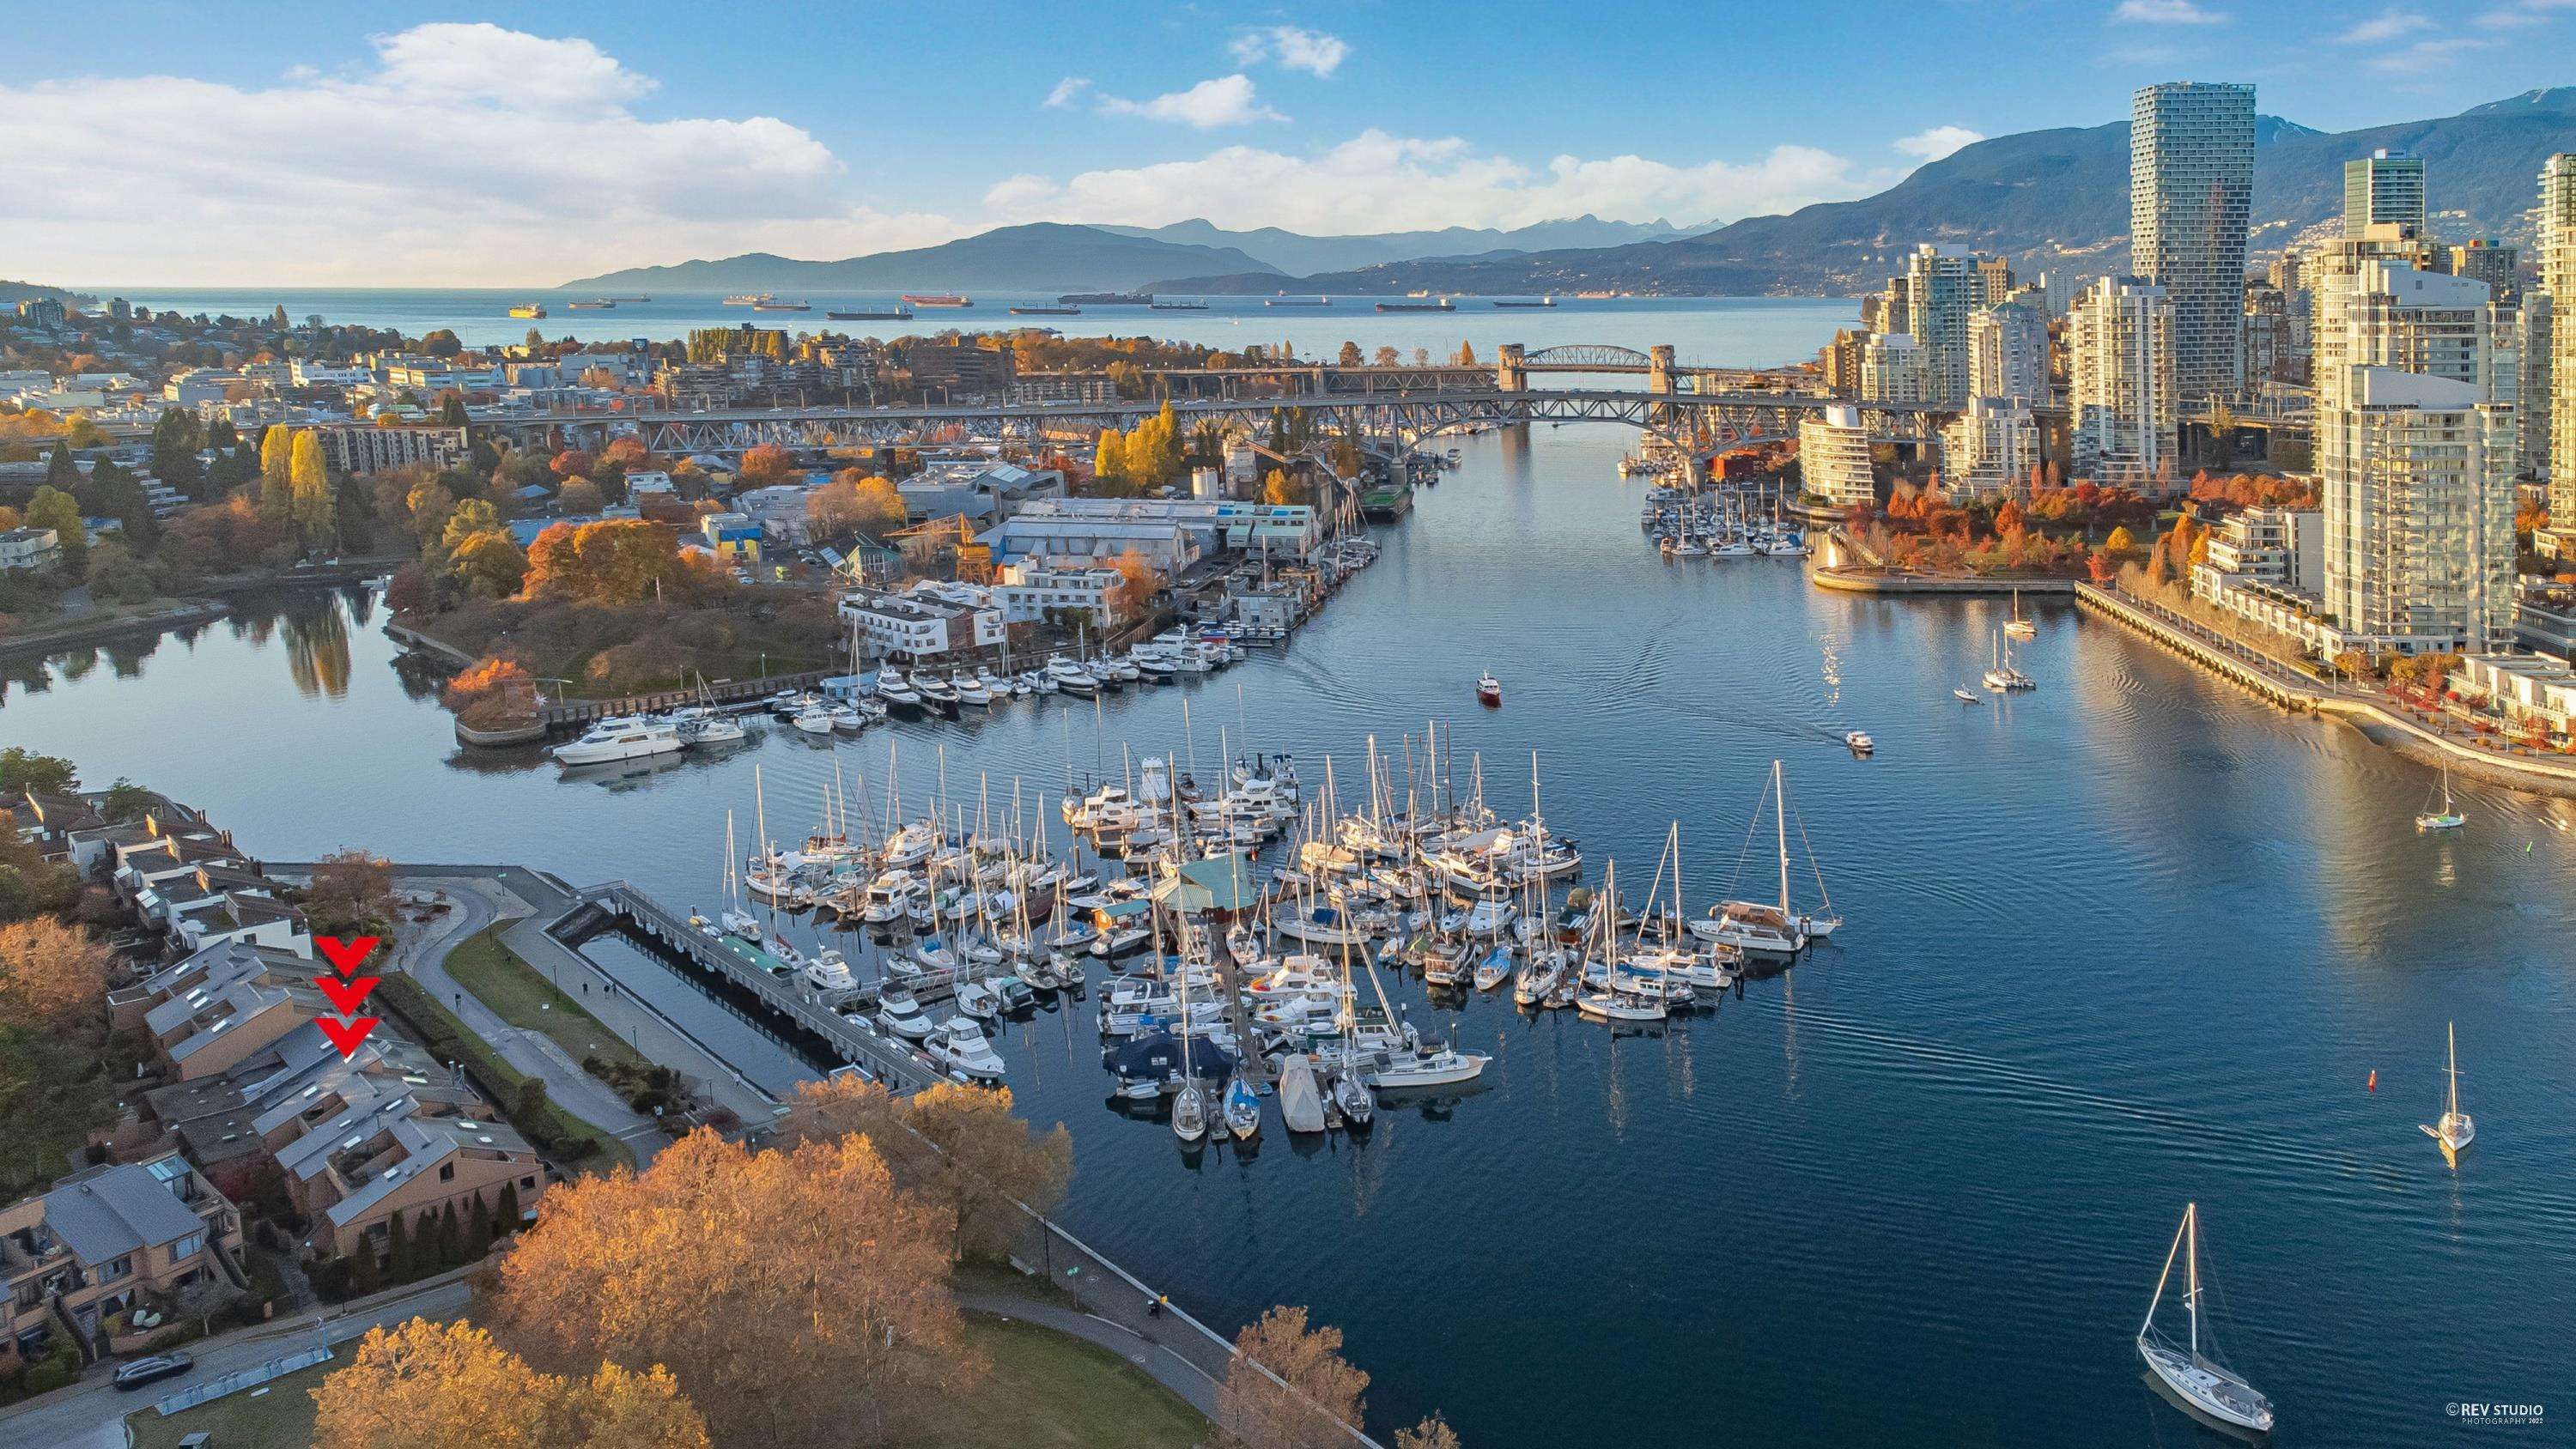 Open House. Open House on Sunday, December 4, 2022 2:00PM - 4:00PM
WATERFRONT TOWNHOUSE w/ stunning water, marina, cityscape and mtn views. 180 degree views W out to English Bay sunsets and E to the Cambie St. Bridge sunrises. Renovation by Colbrone Archi